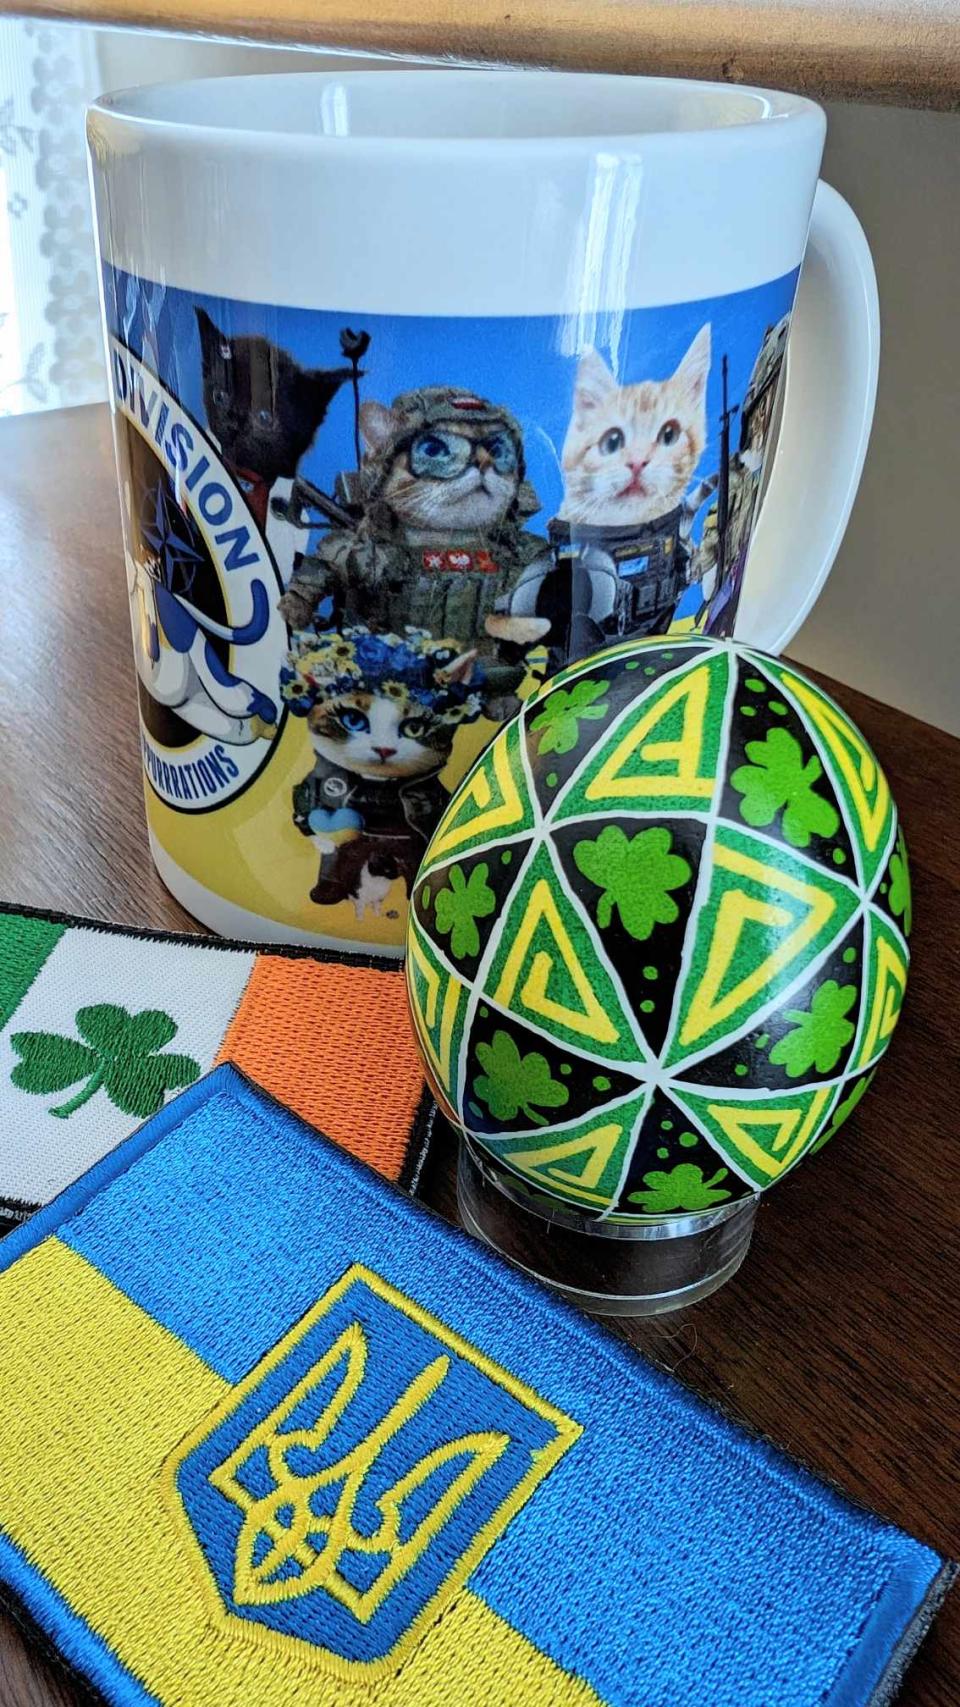 One of Reinder's pysanka, decorated with shamrocks, was used in a fundraiser to raise money for Ukrainian humanitarian relief and it is now in Austria. 